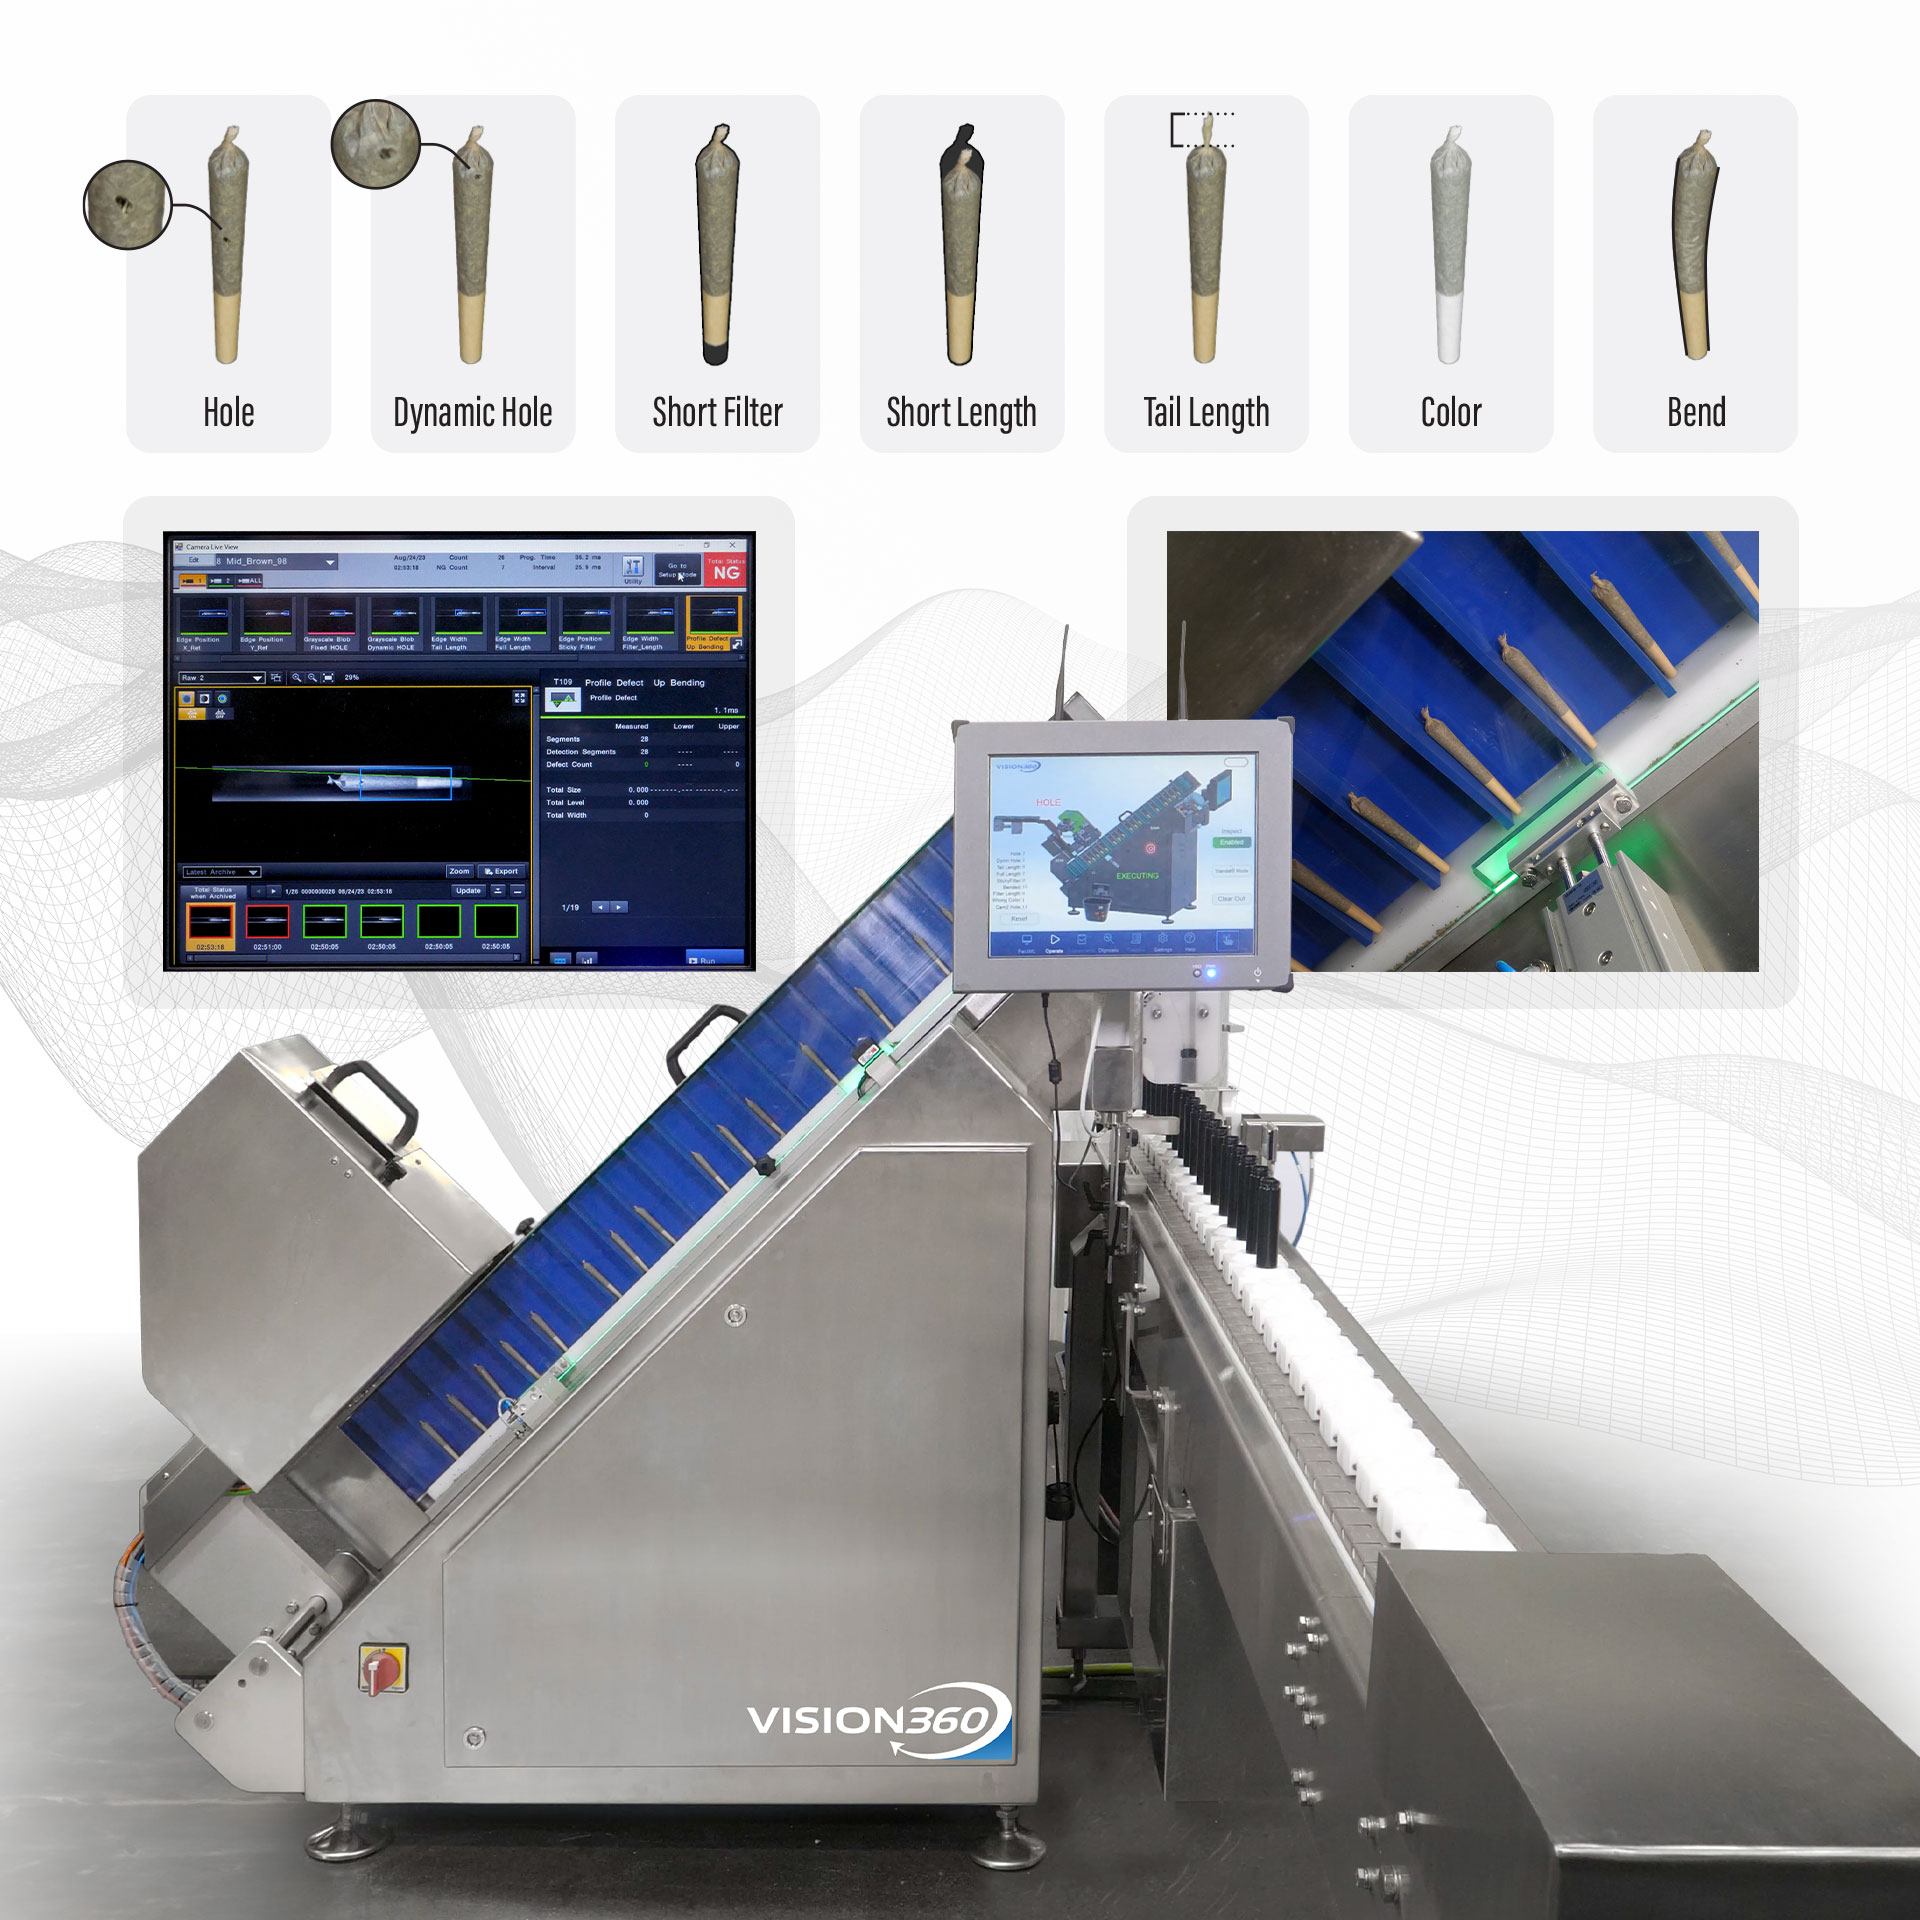 Introducing the Revolutionary Vision360 Inspection System for Pre-Rolls -  Paxiom